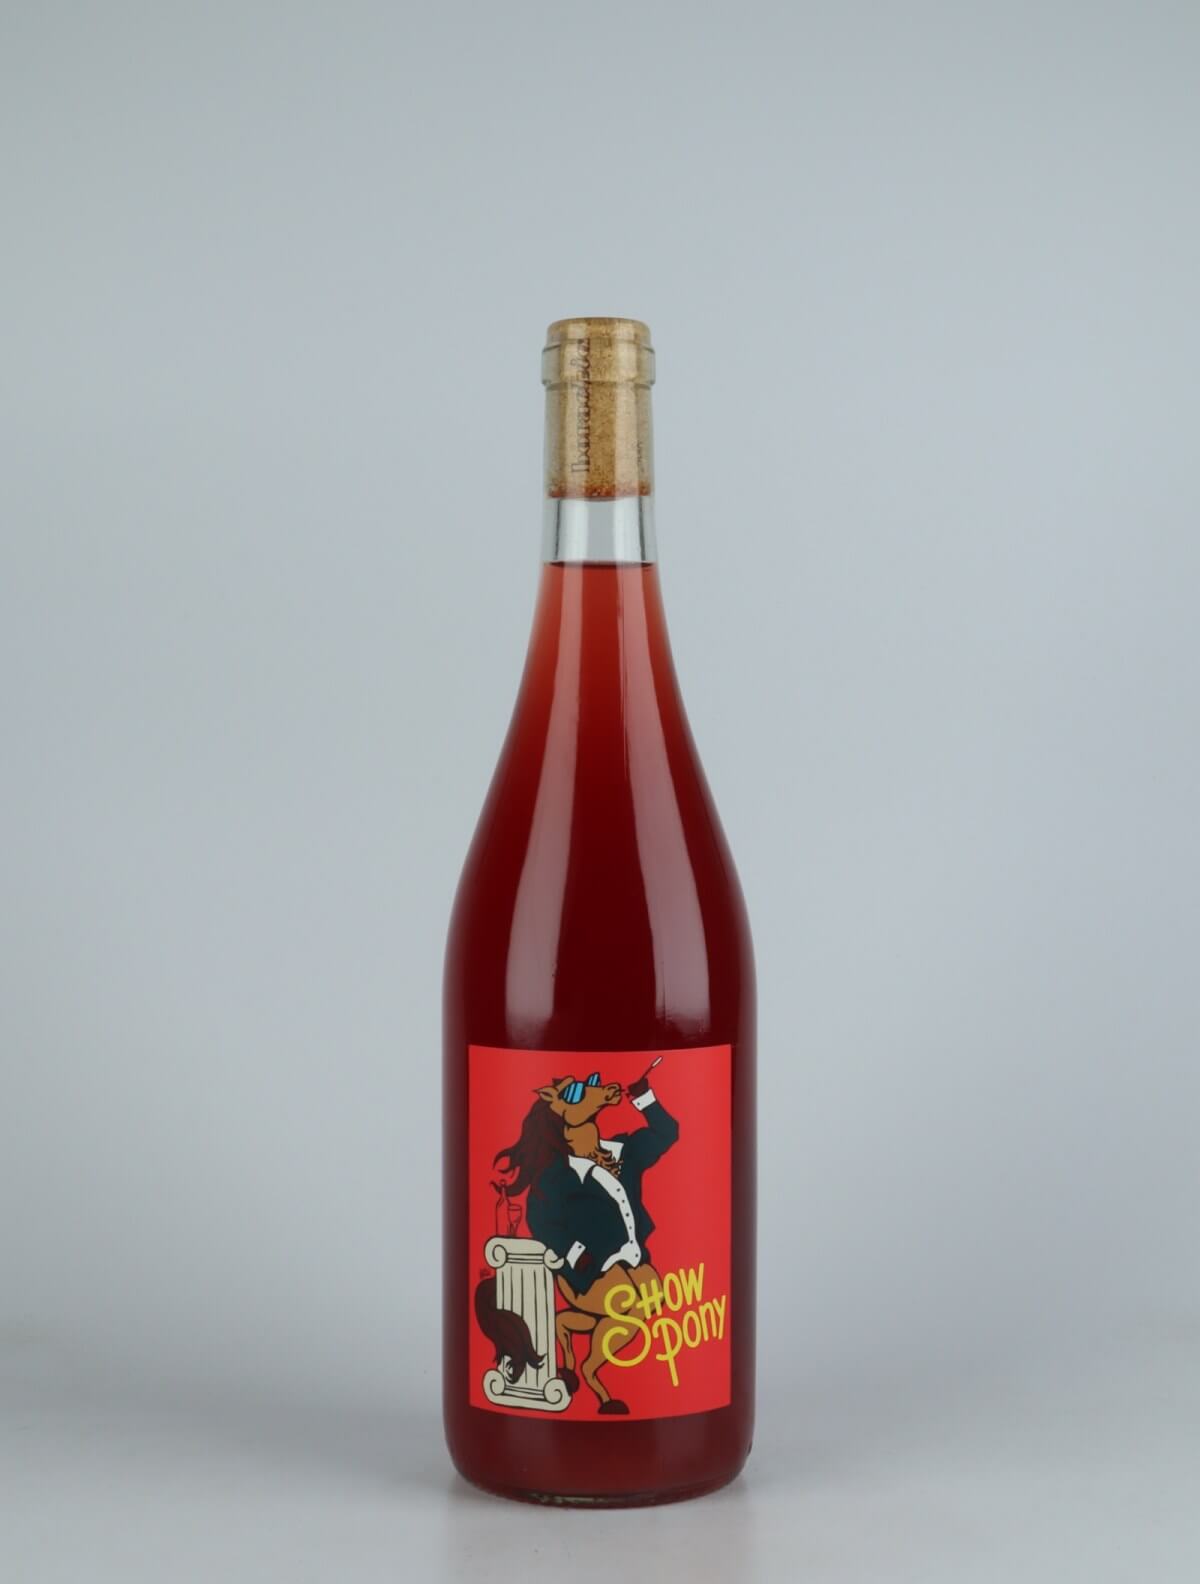 A bottle N.V. Show Pony Rosé from Borachio, Adelaide Hills in 